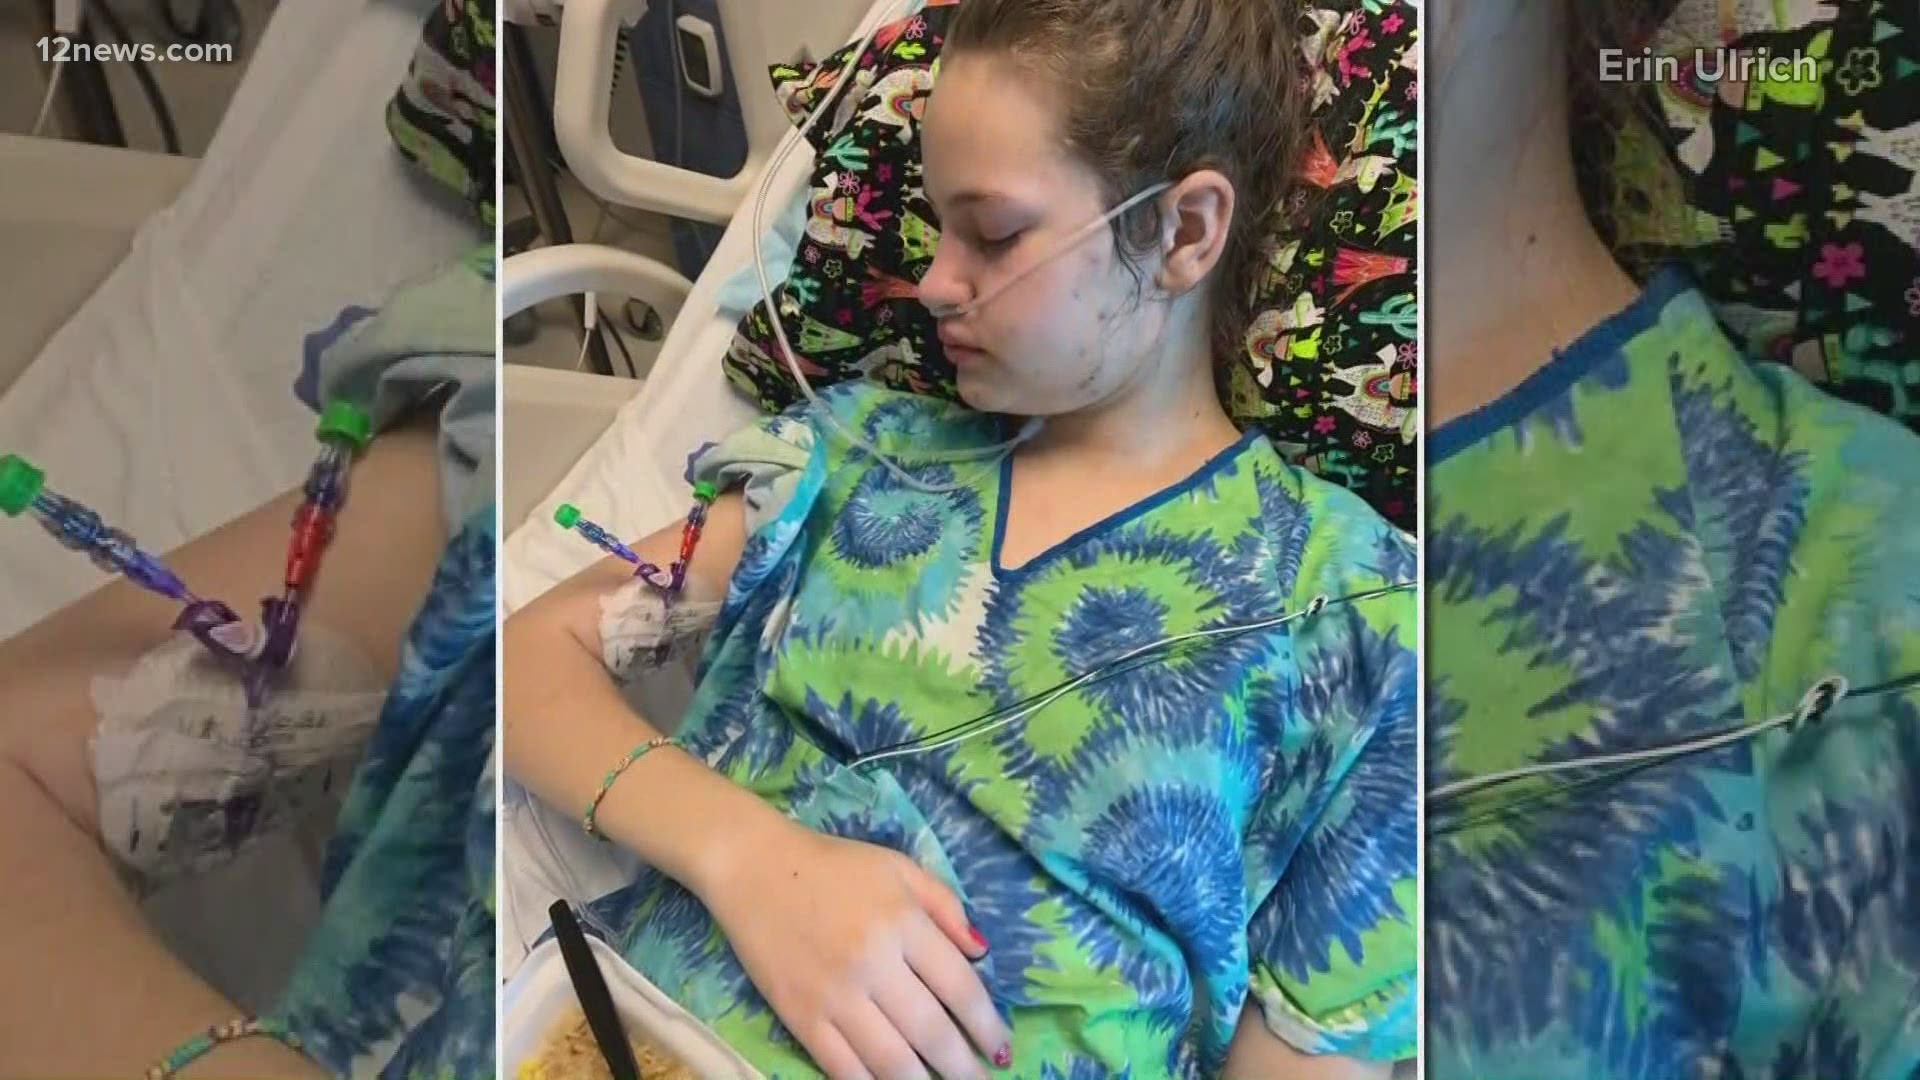 Lydia, a Valley teen, tested positive for COVID-19 which then led to a leukemia diagnosis. The community has found a way to help with the biggest battle of her life.